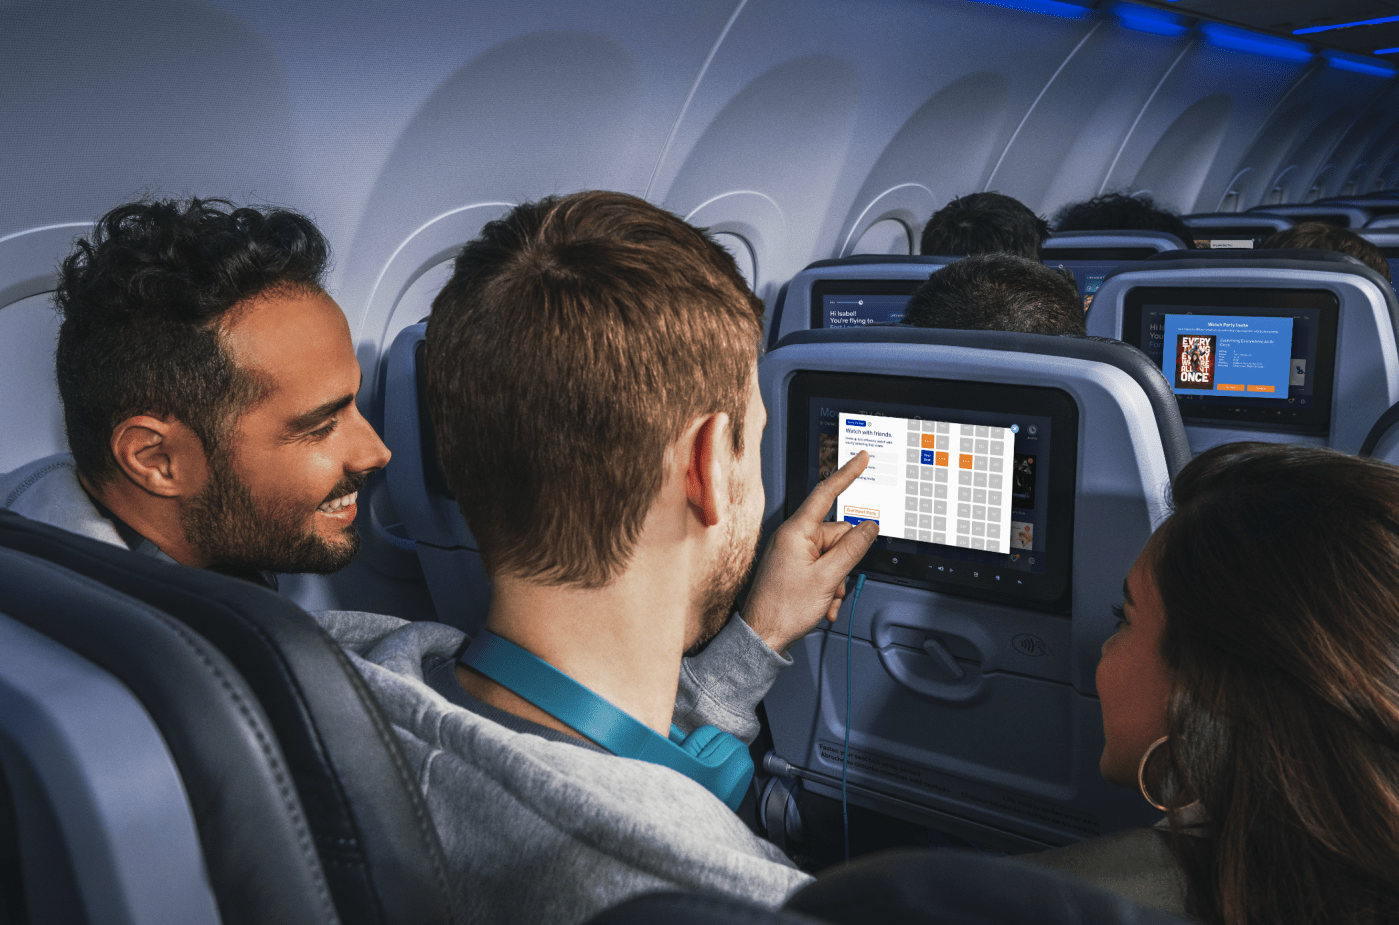 JetBlue's in-flight entertainment system just got a watch party feature